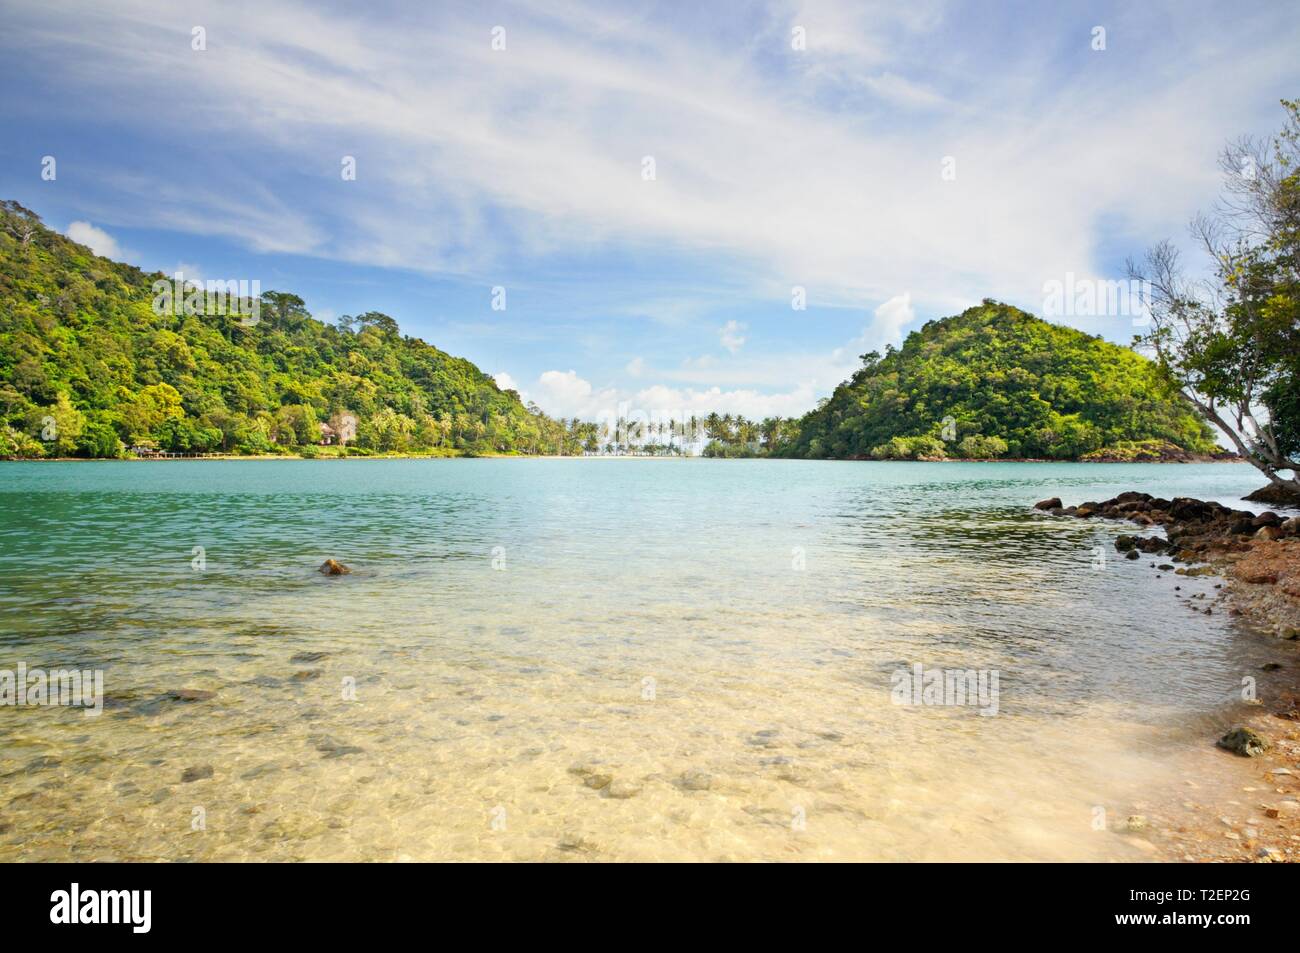 Crystal clear tropical sea with island covered with rainforest on horizon at the Koh Chang island, Thailand. Stock Photo